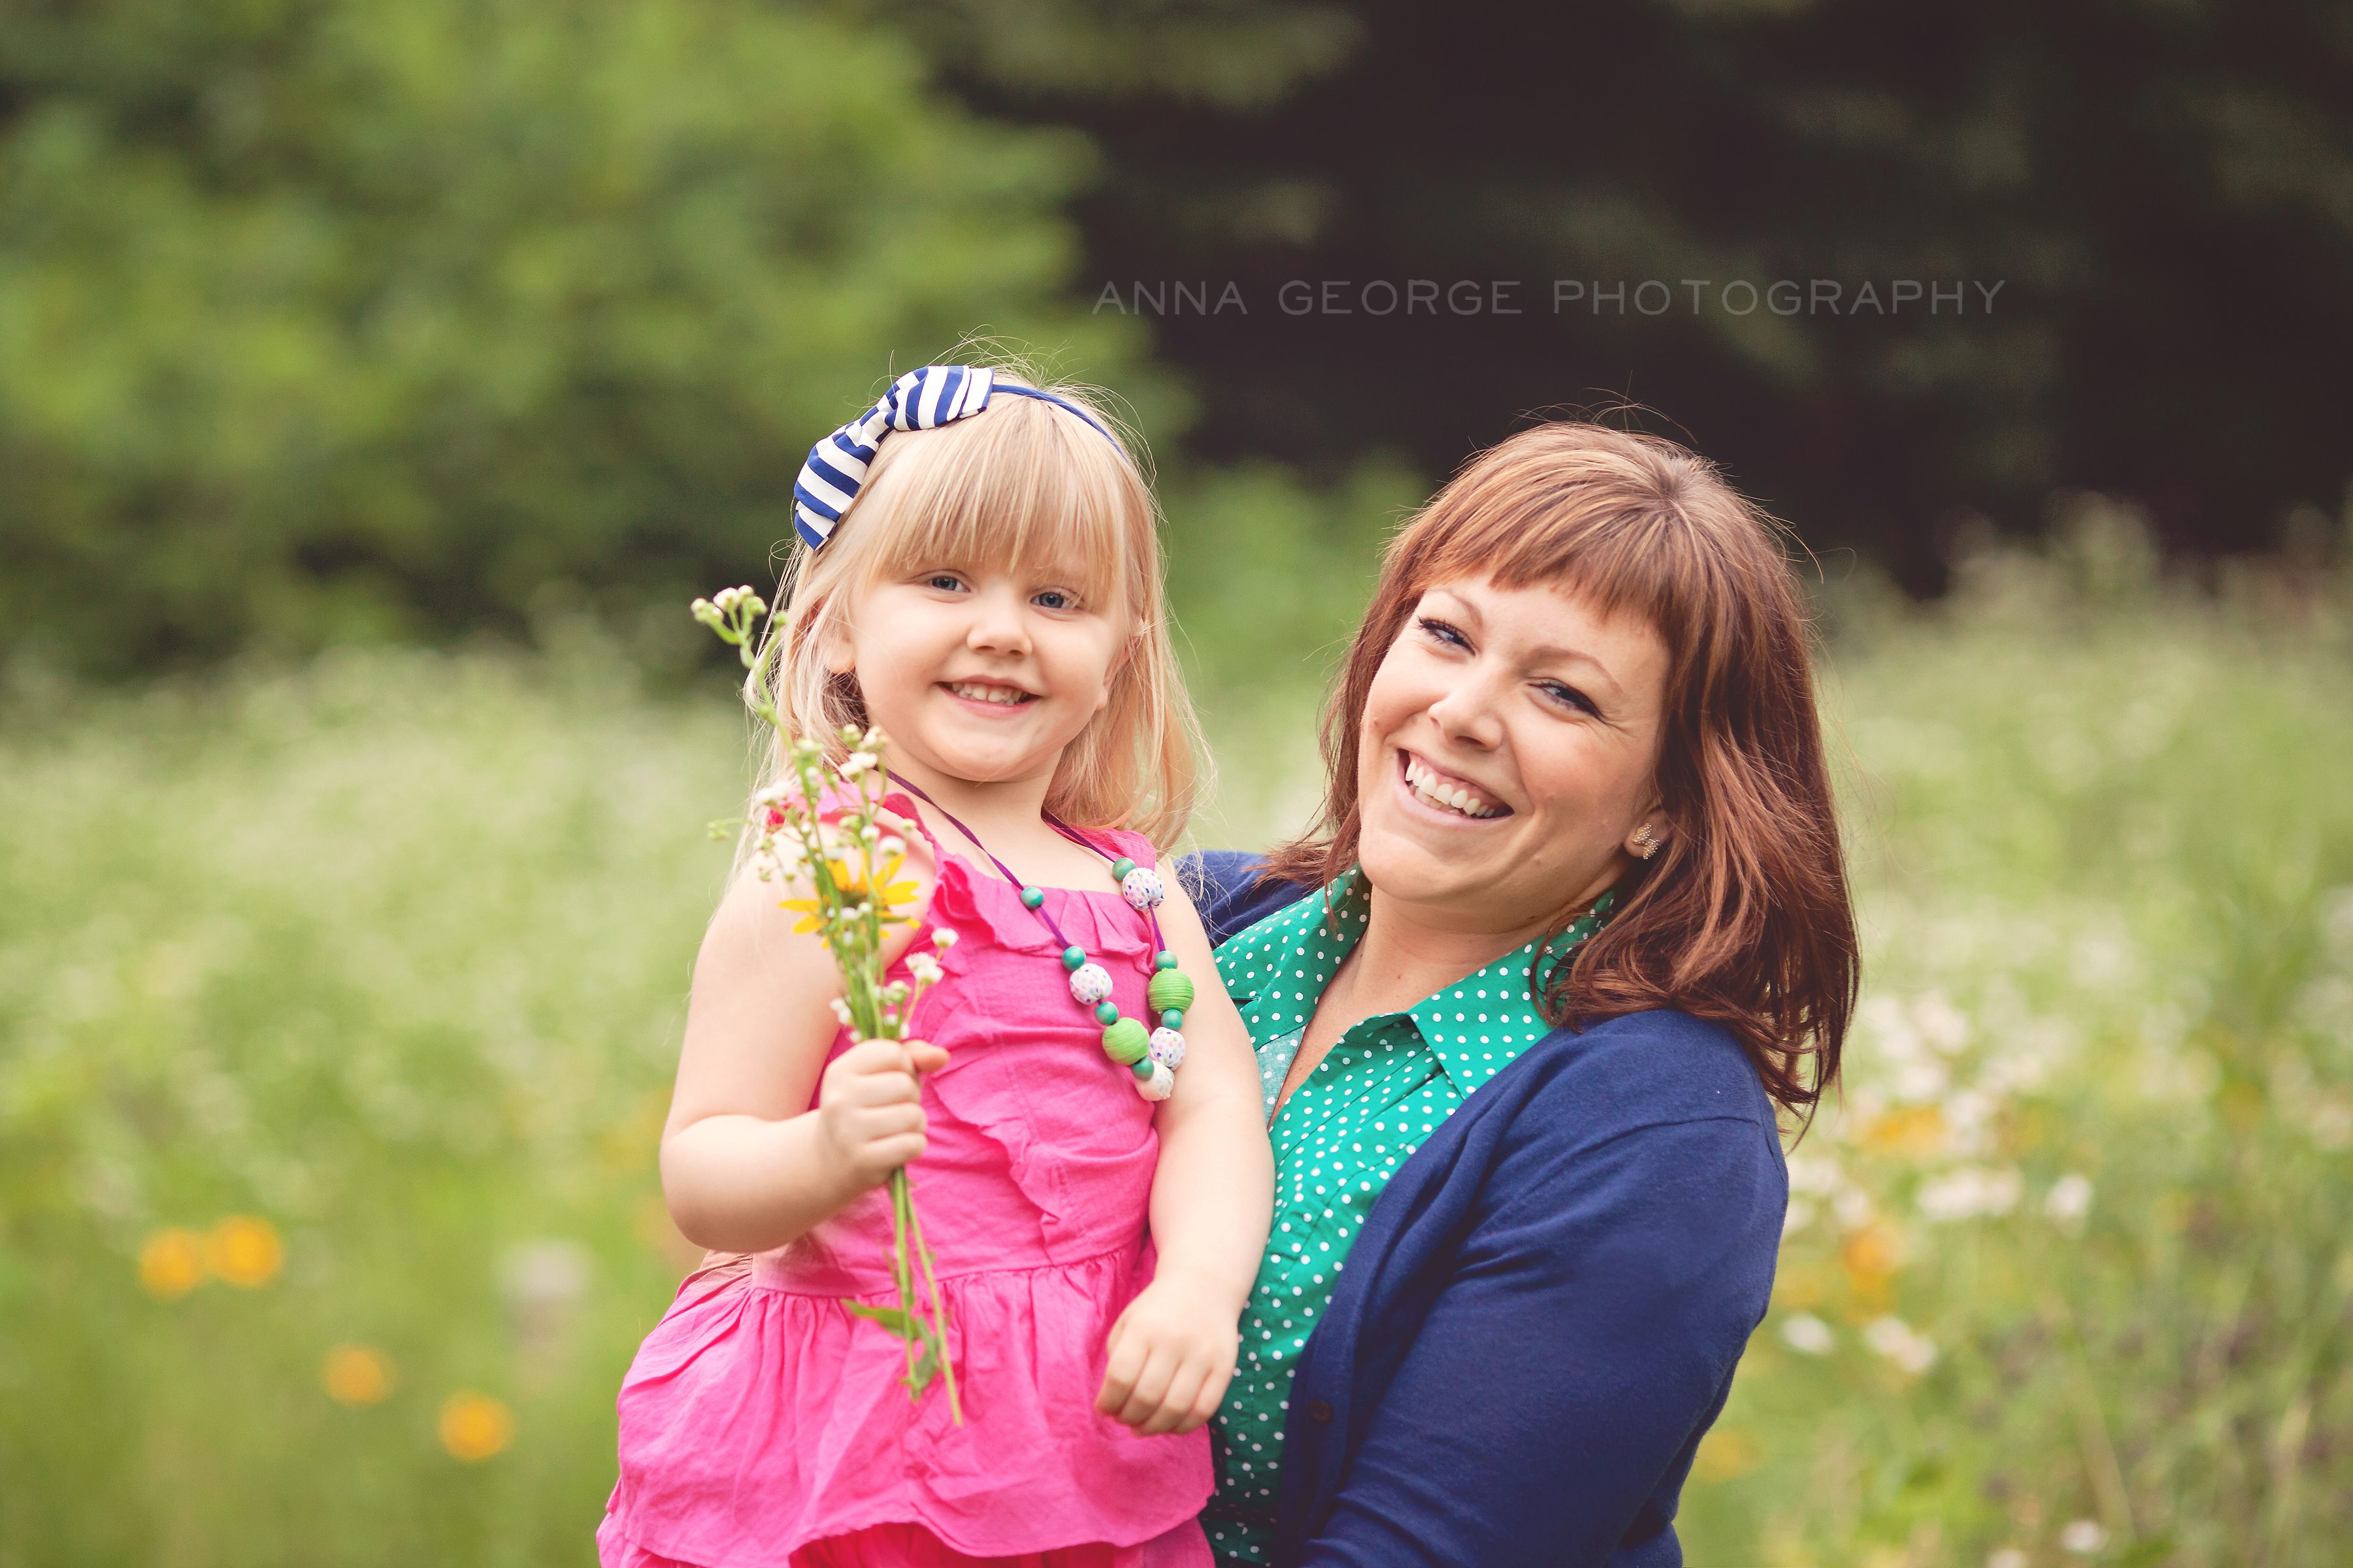 Madison WI child & family photography - anna george photography - www.annageorgephoto.com